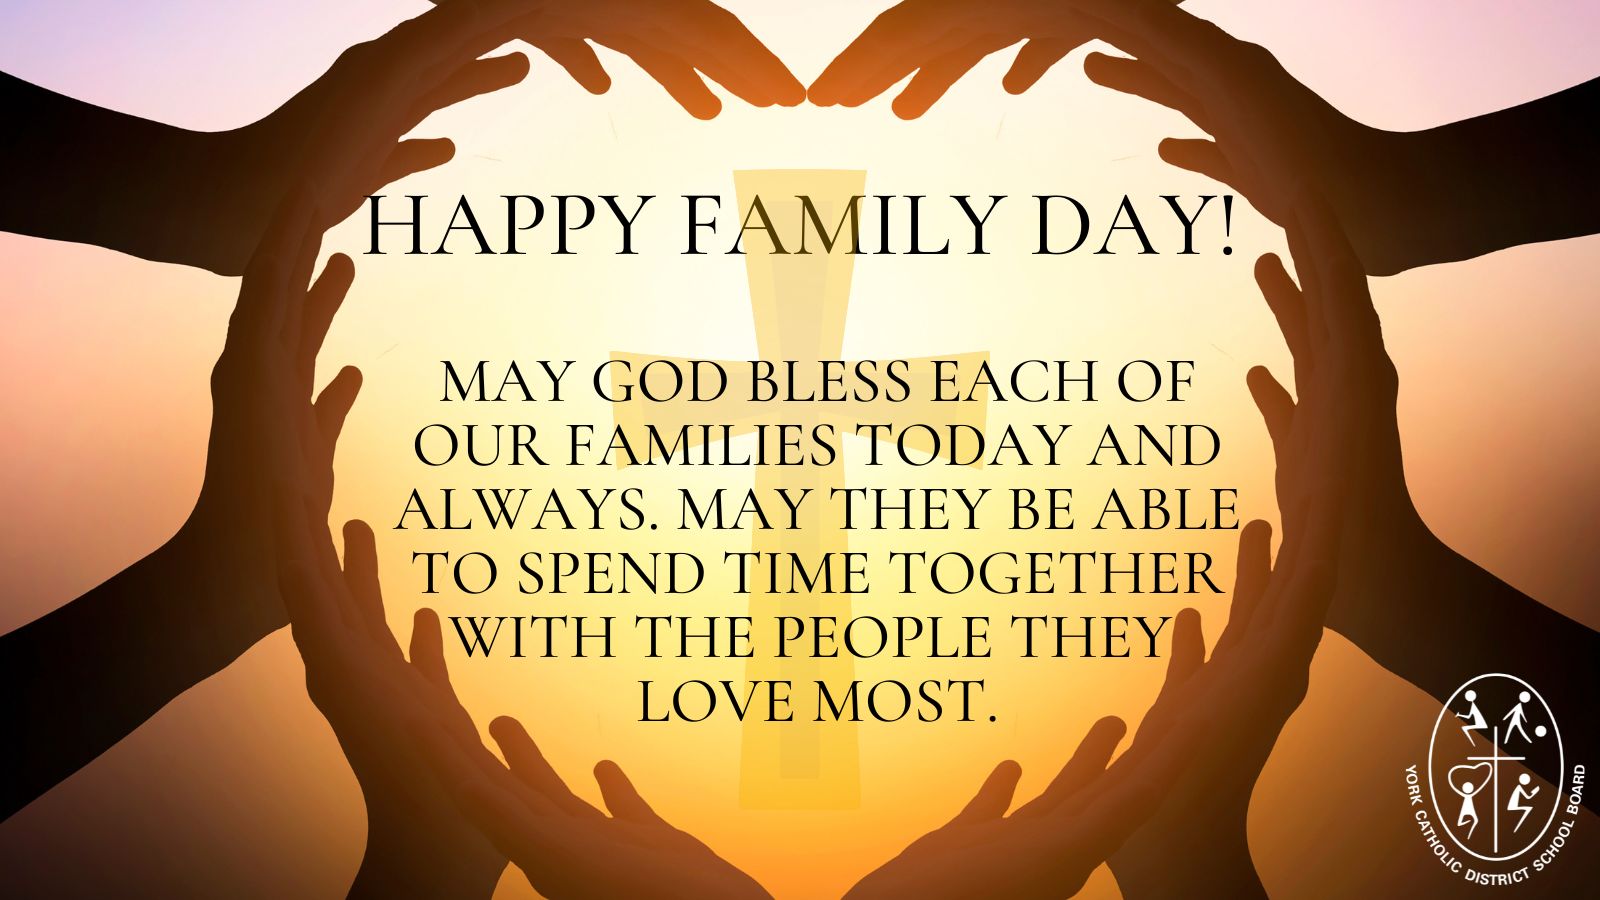 A Family Day Message